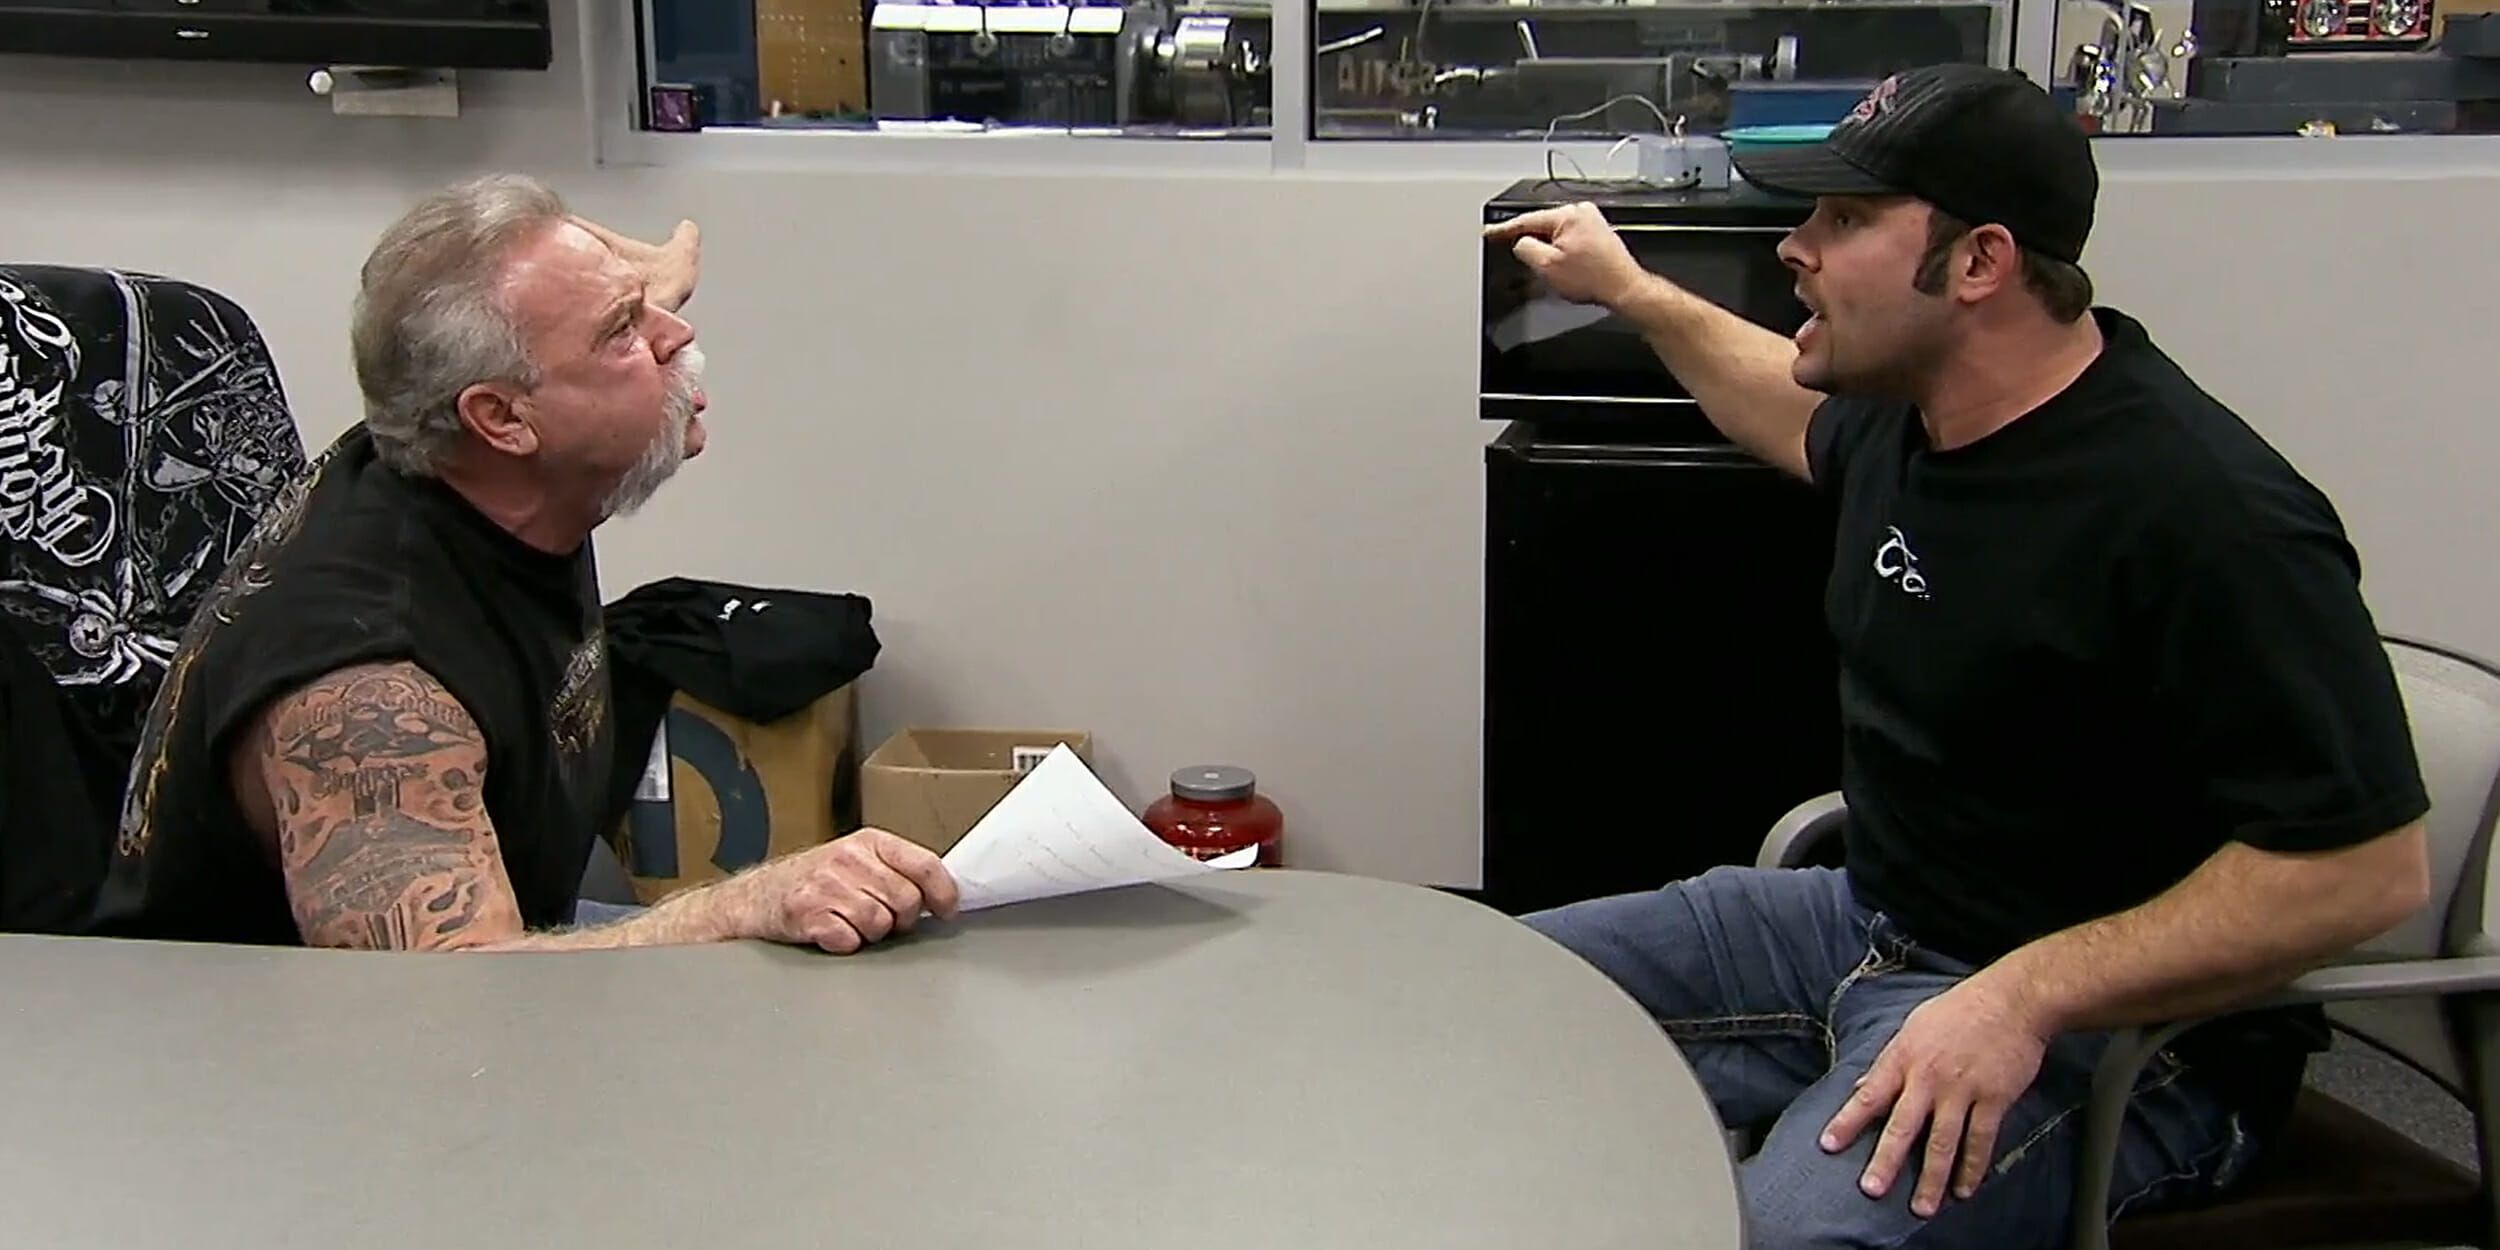 Fight between Paul Teutul Sr and Jr on the American Chopper TV show